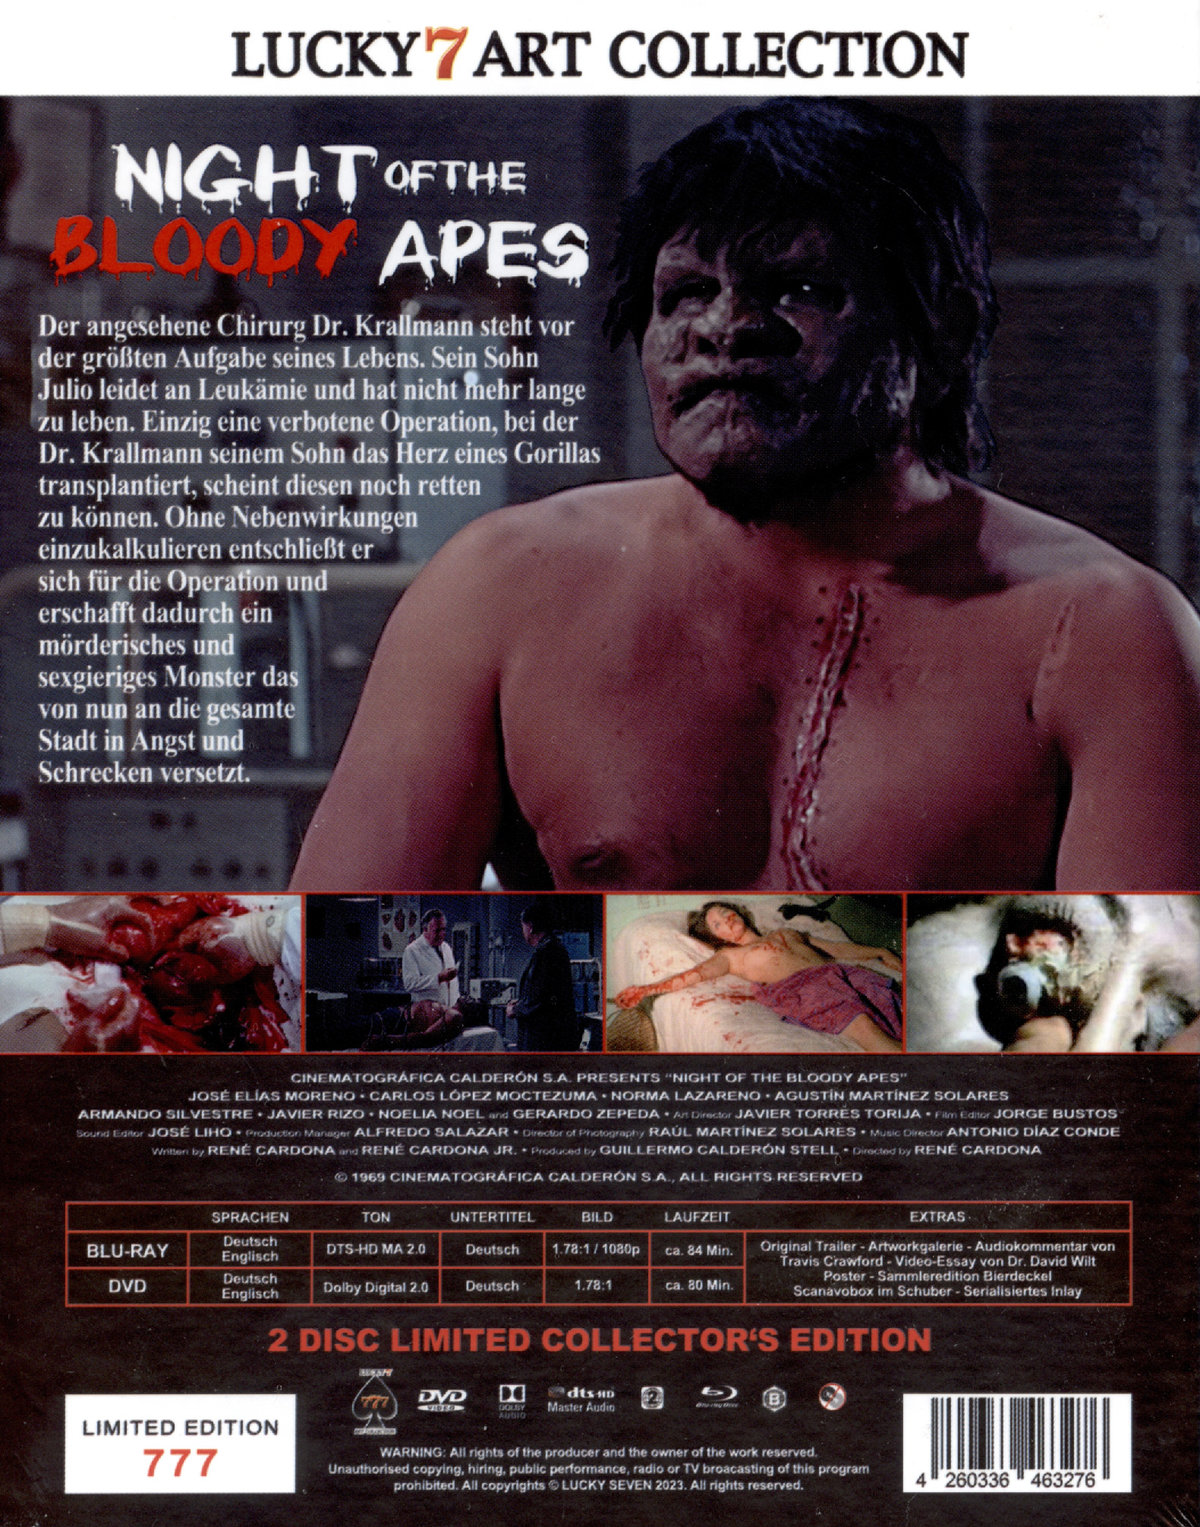 Night of the Bloody Apes - Uncut Edition (DVD+blu-ray)